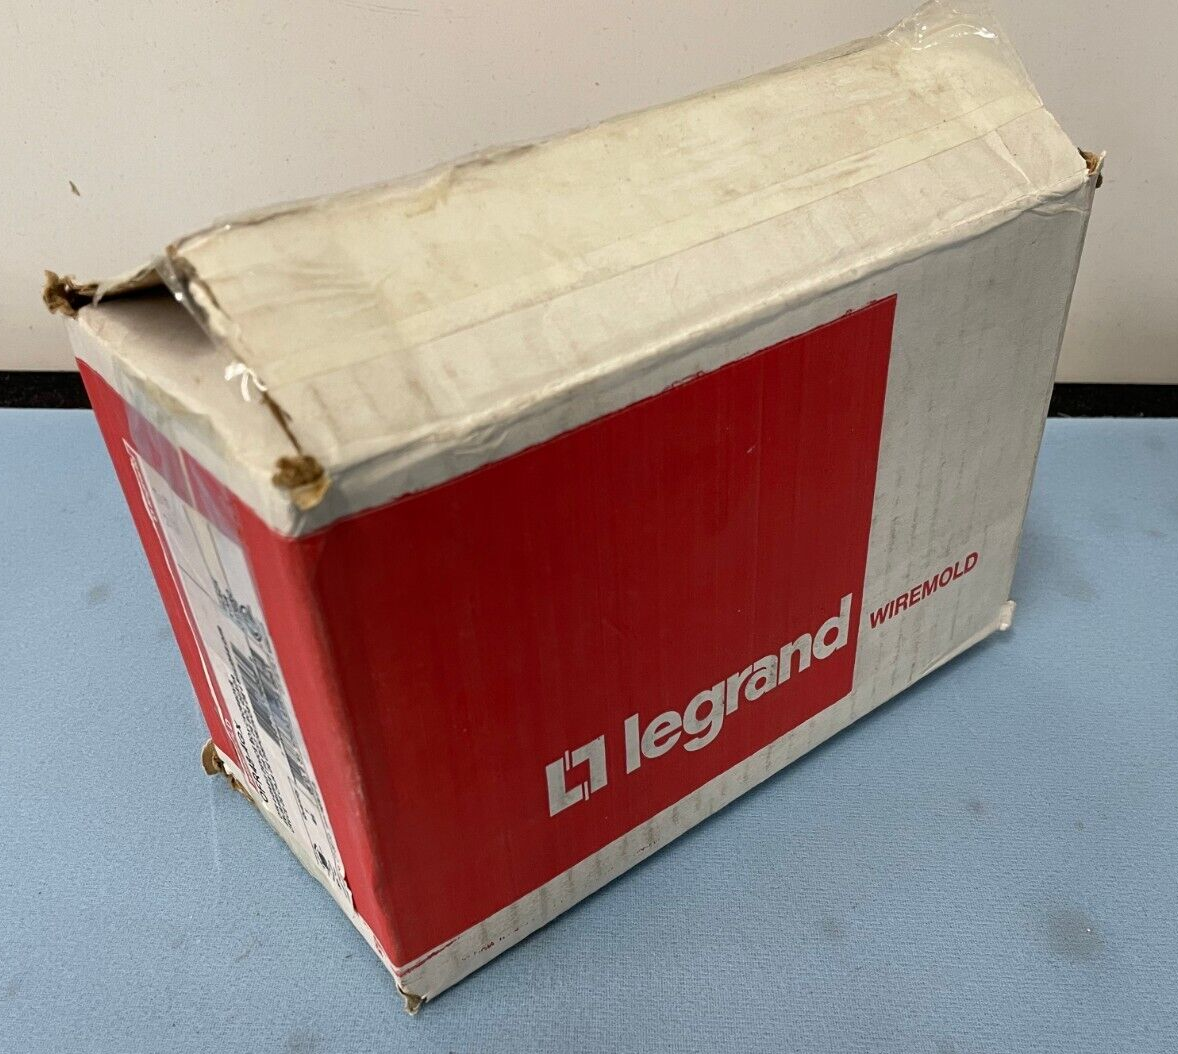 Legrand Wiremold OFR48-4GX OVER FLOOR 4-GANG DEVICE BOX CROSSOVER